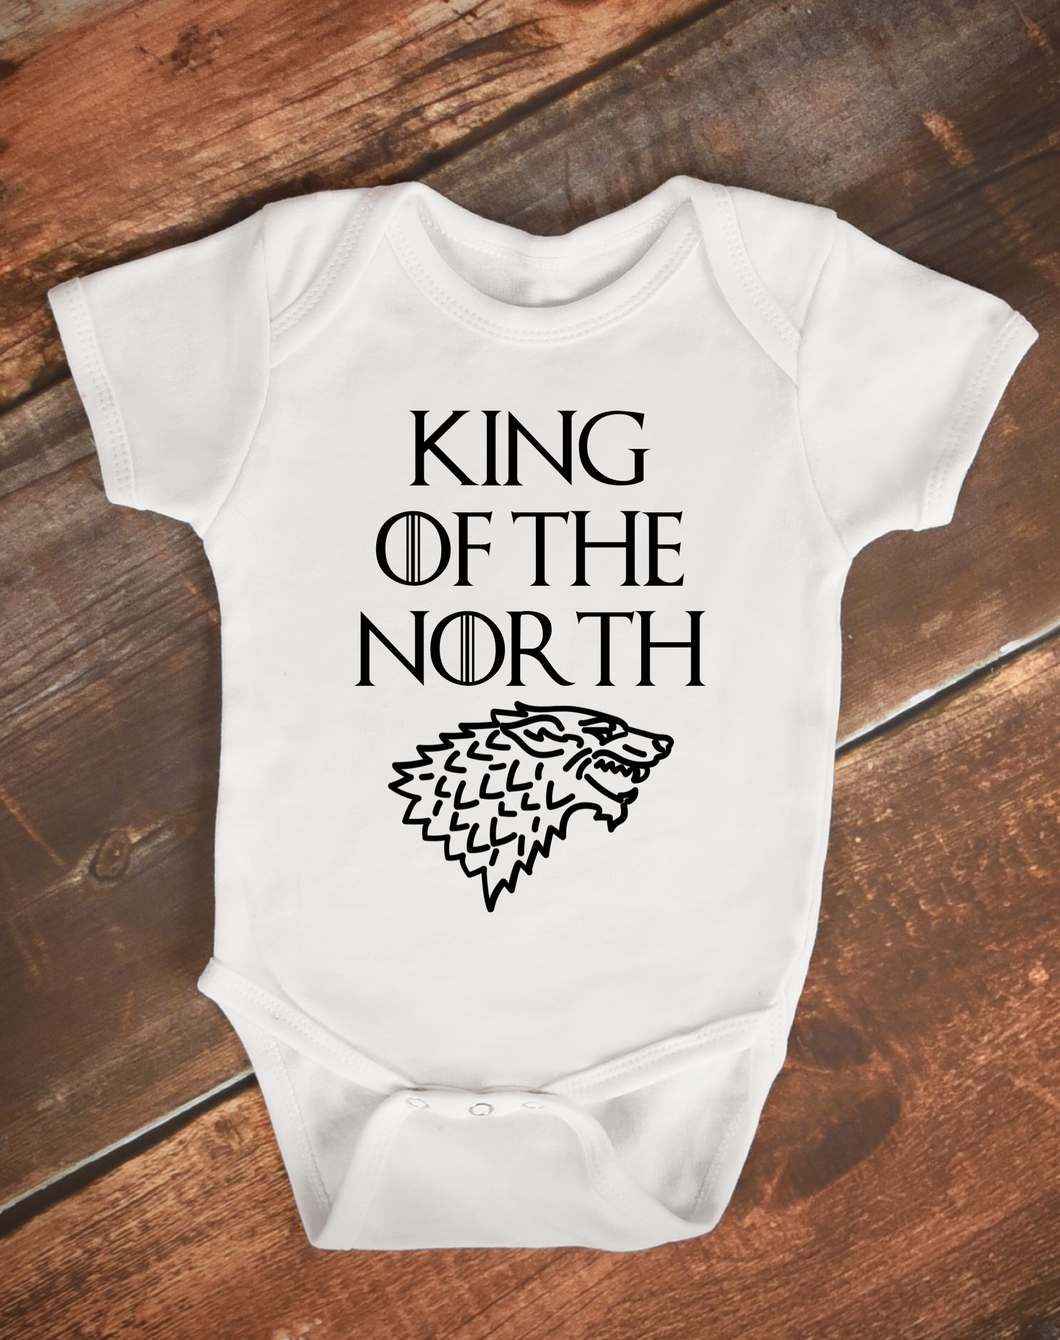 King of the North Baby Bodysuit